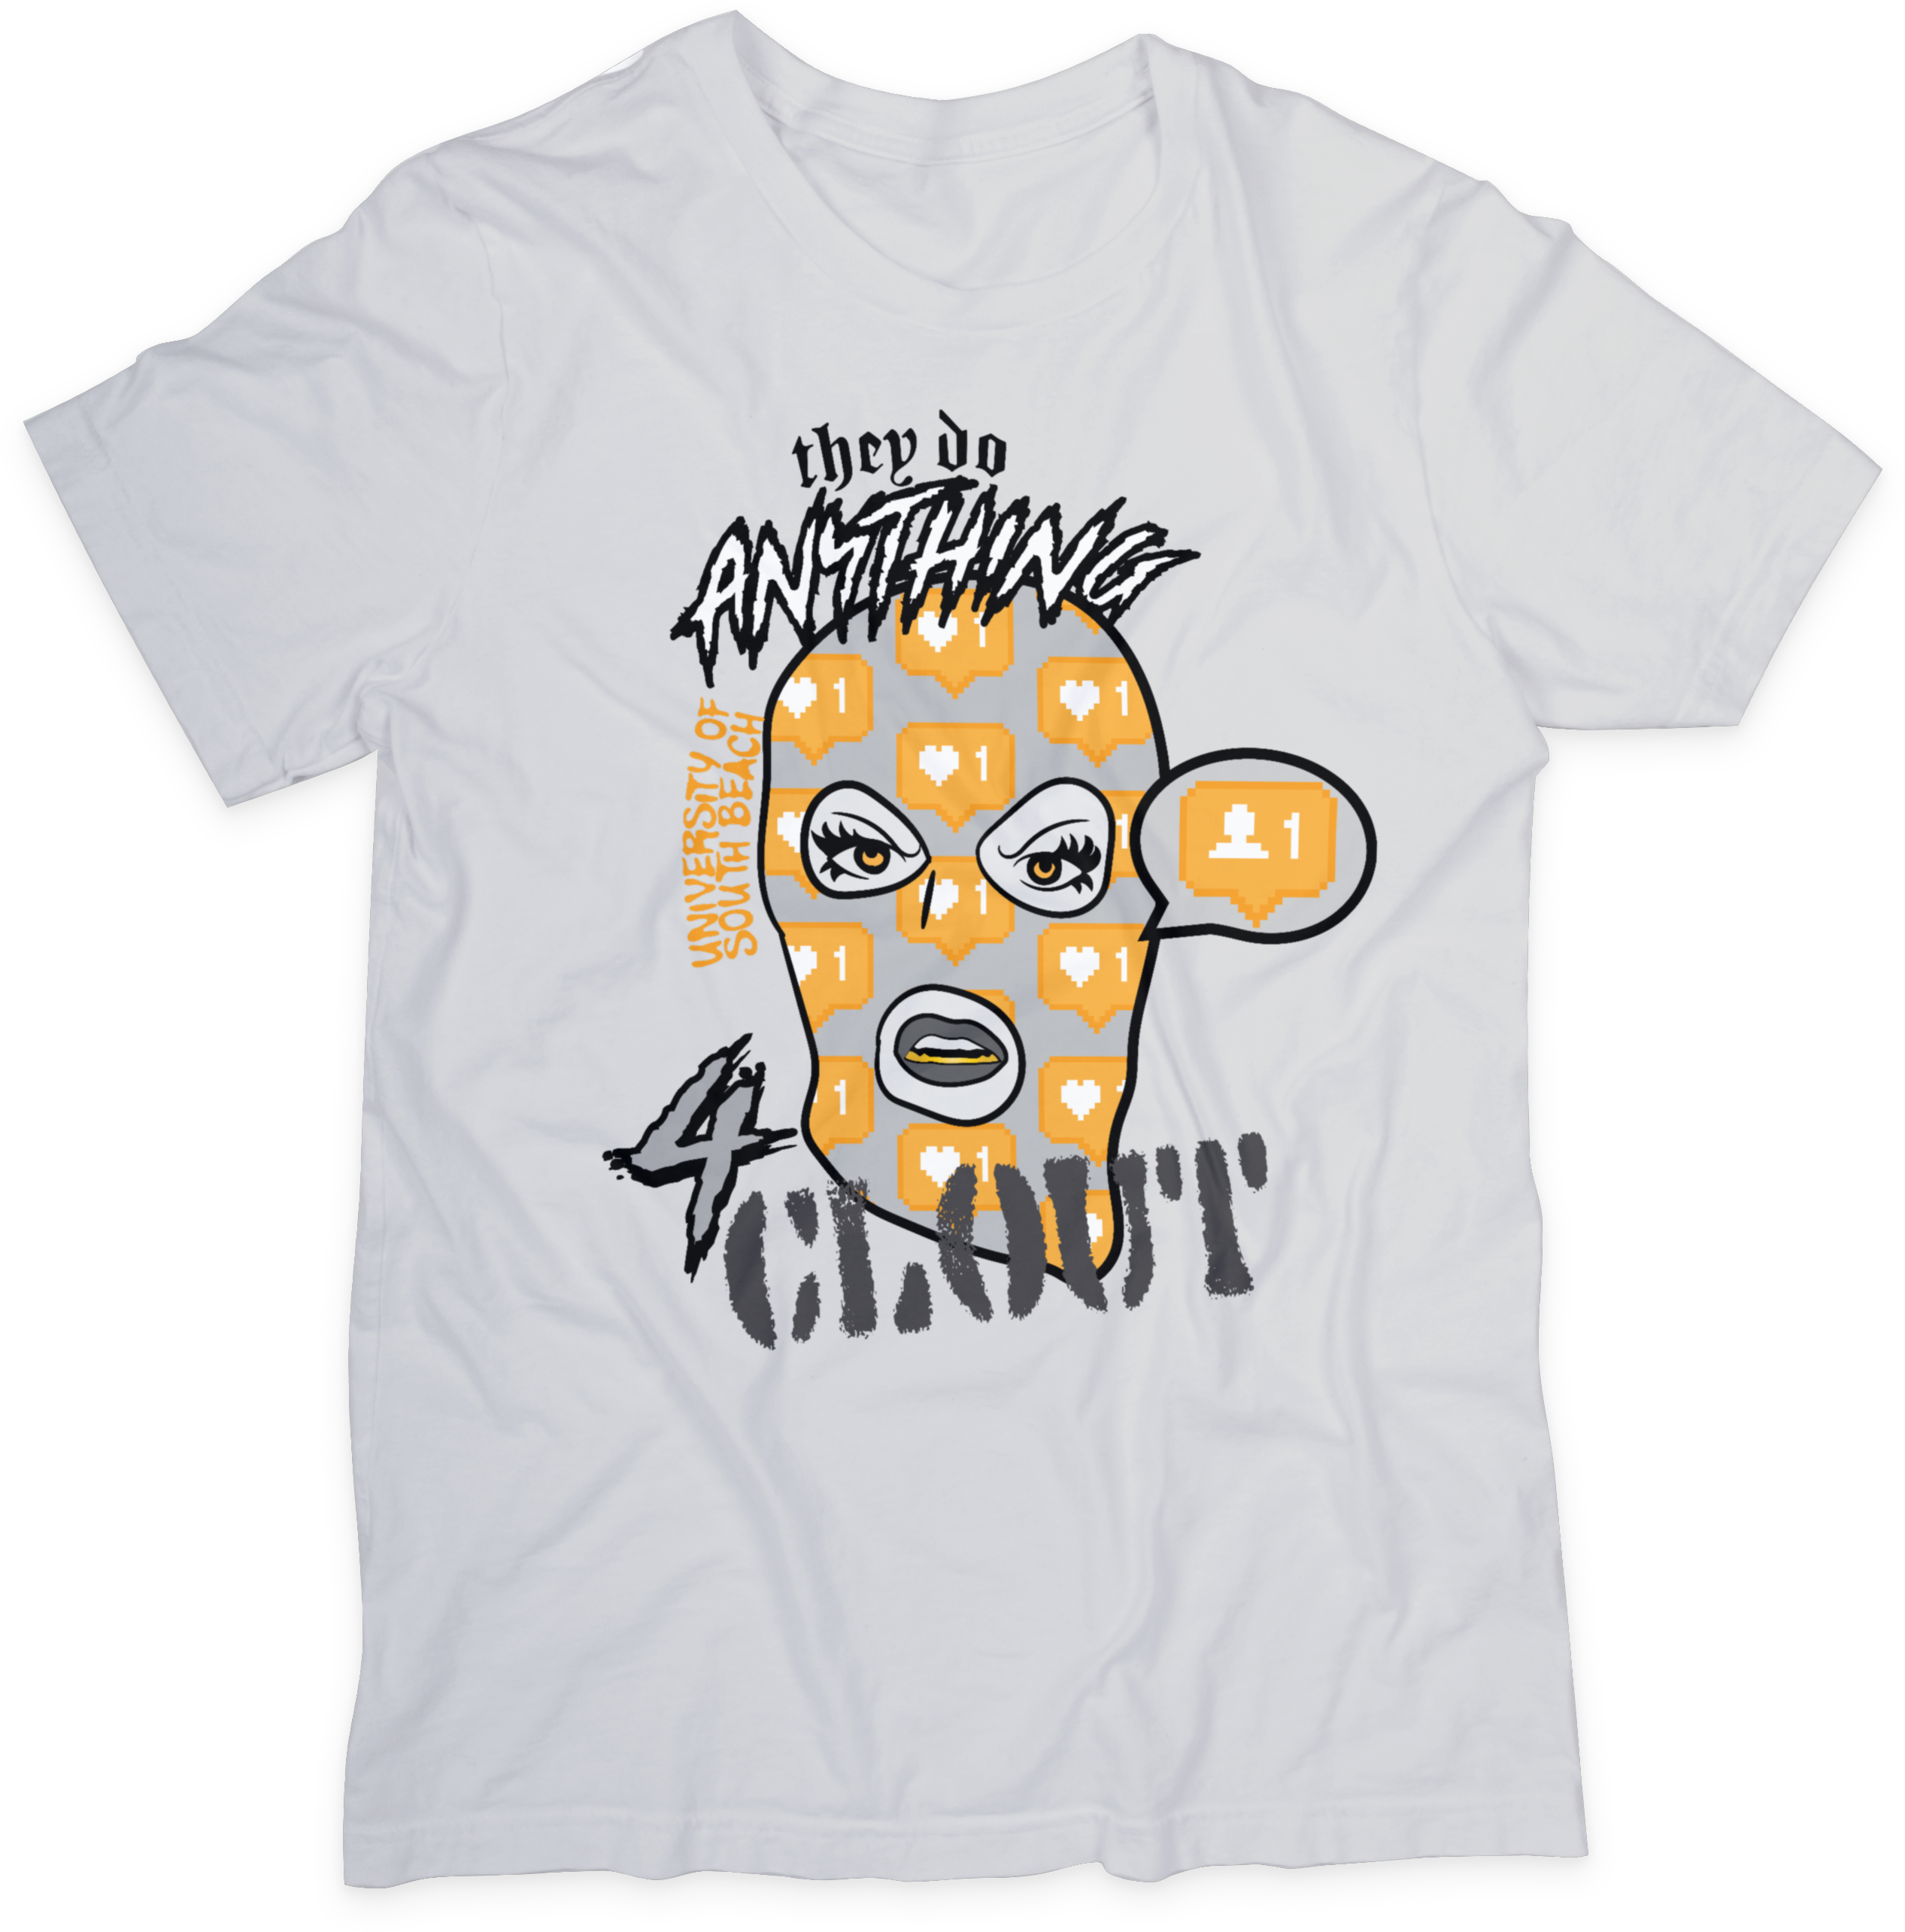 They Do Anything 4 Clout Ski Mask T-Shirt